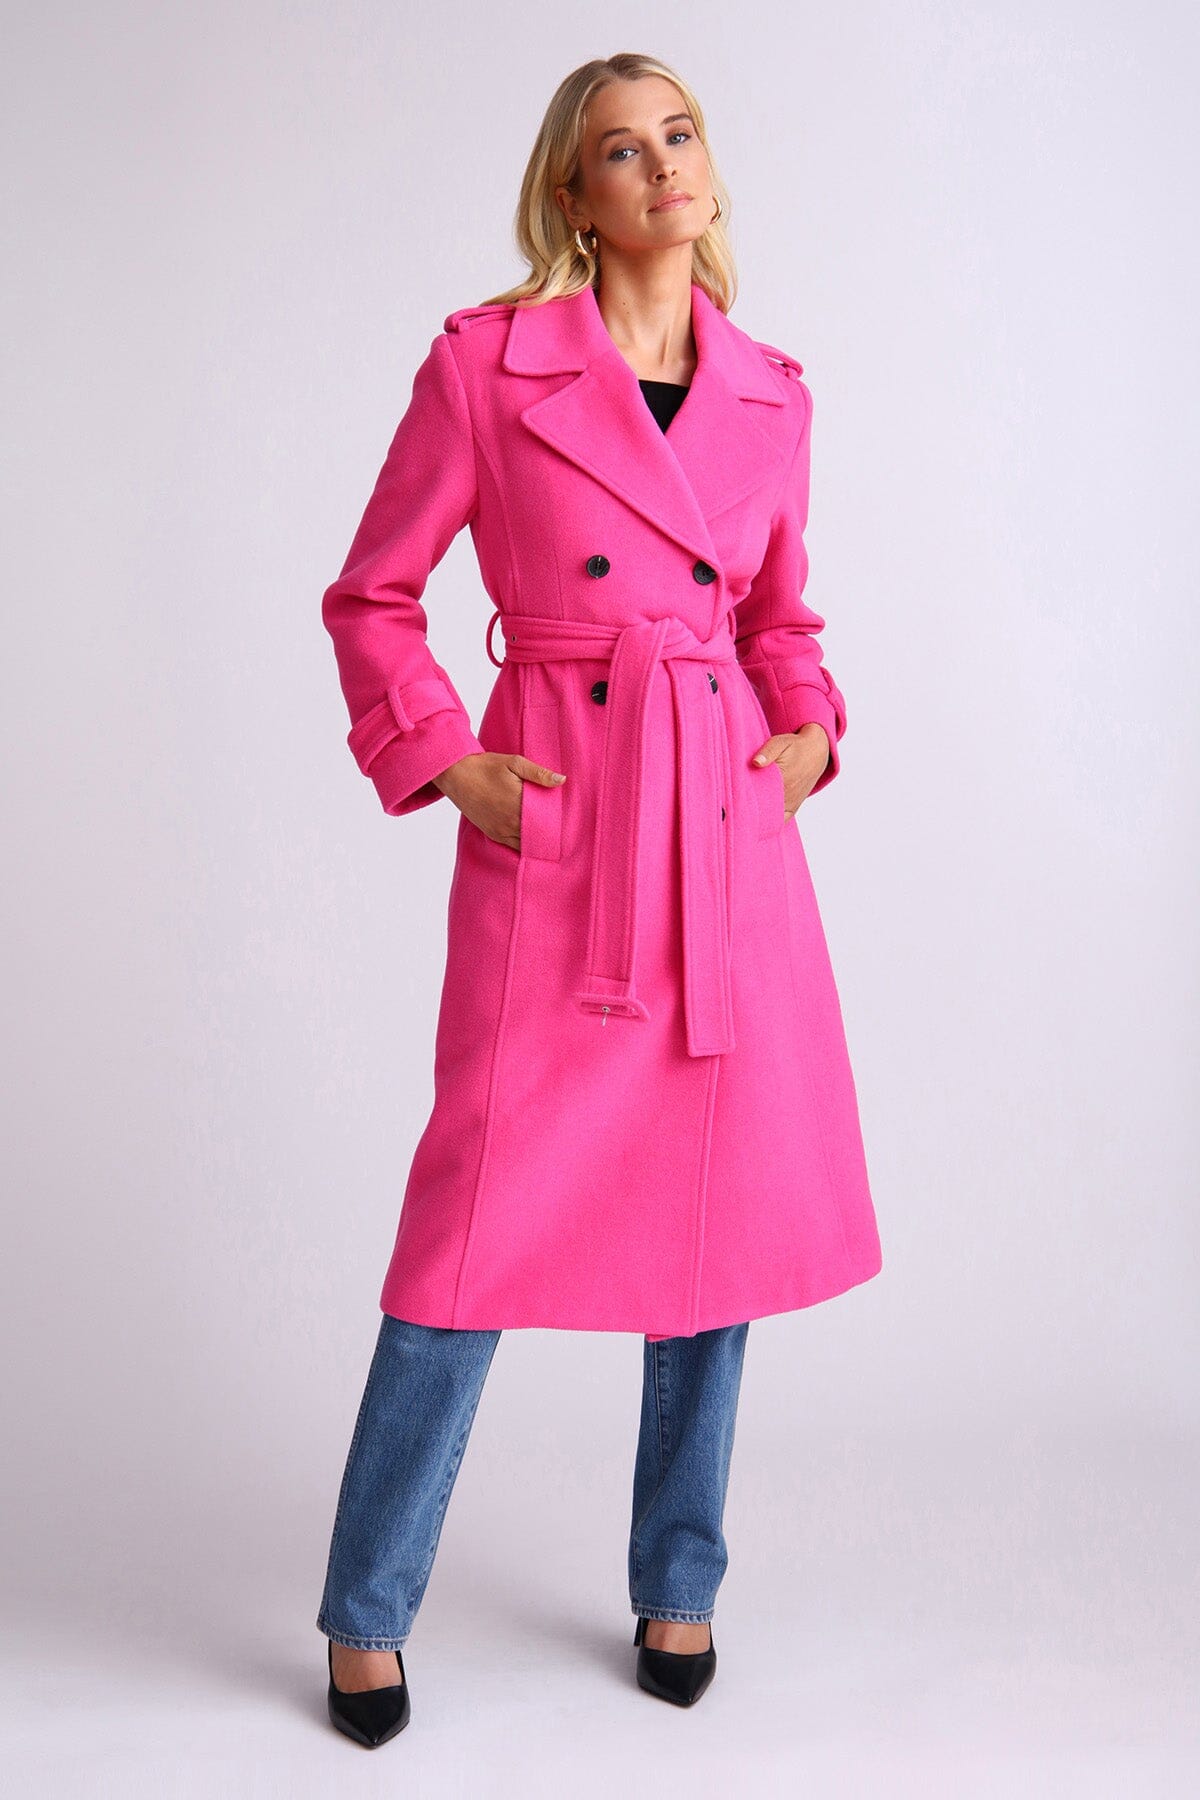 Fuchsia pink strong shoulder belted trench coat jacket - women's figure flattering statement piece coats outerwear for fall trends